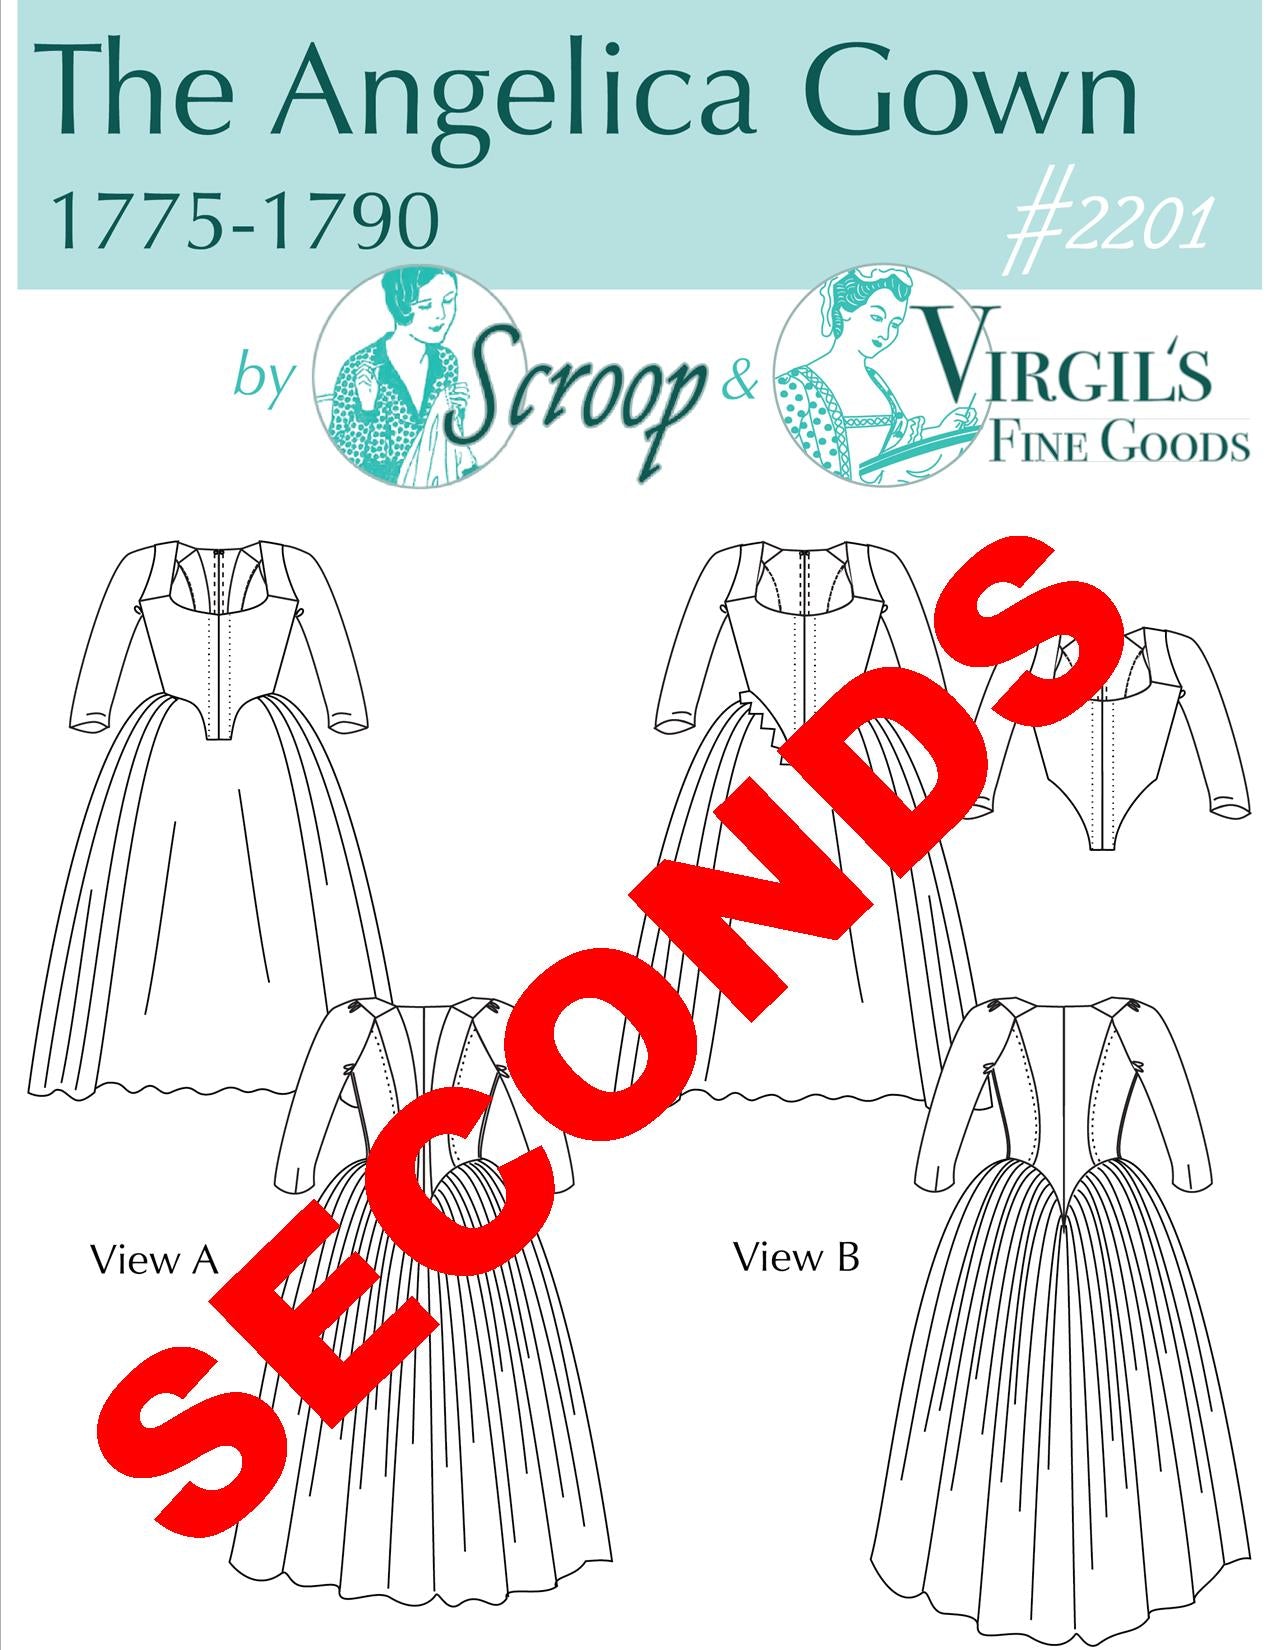 SECONDS Angelica Italian Gown Paper Pattern  || Scroop Patterns & Virgil's Fine Goods